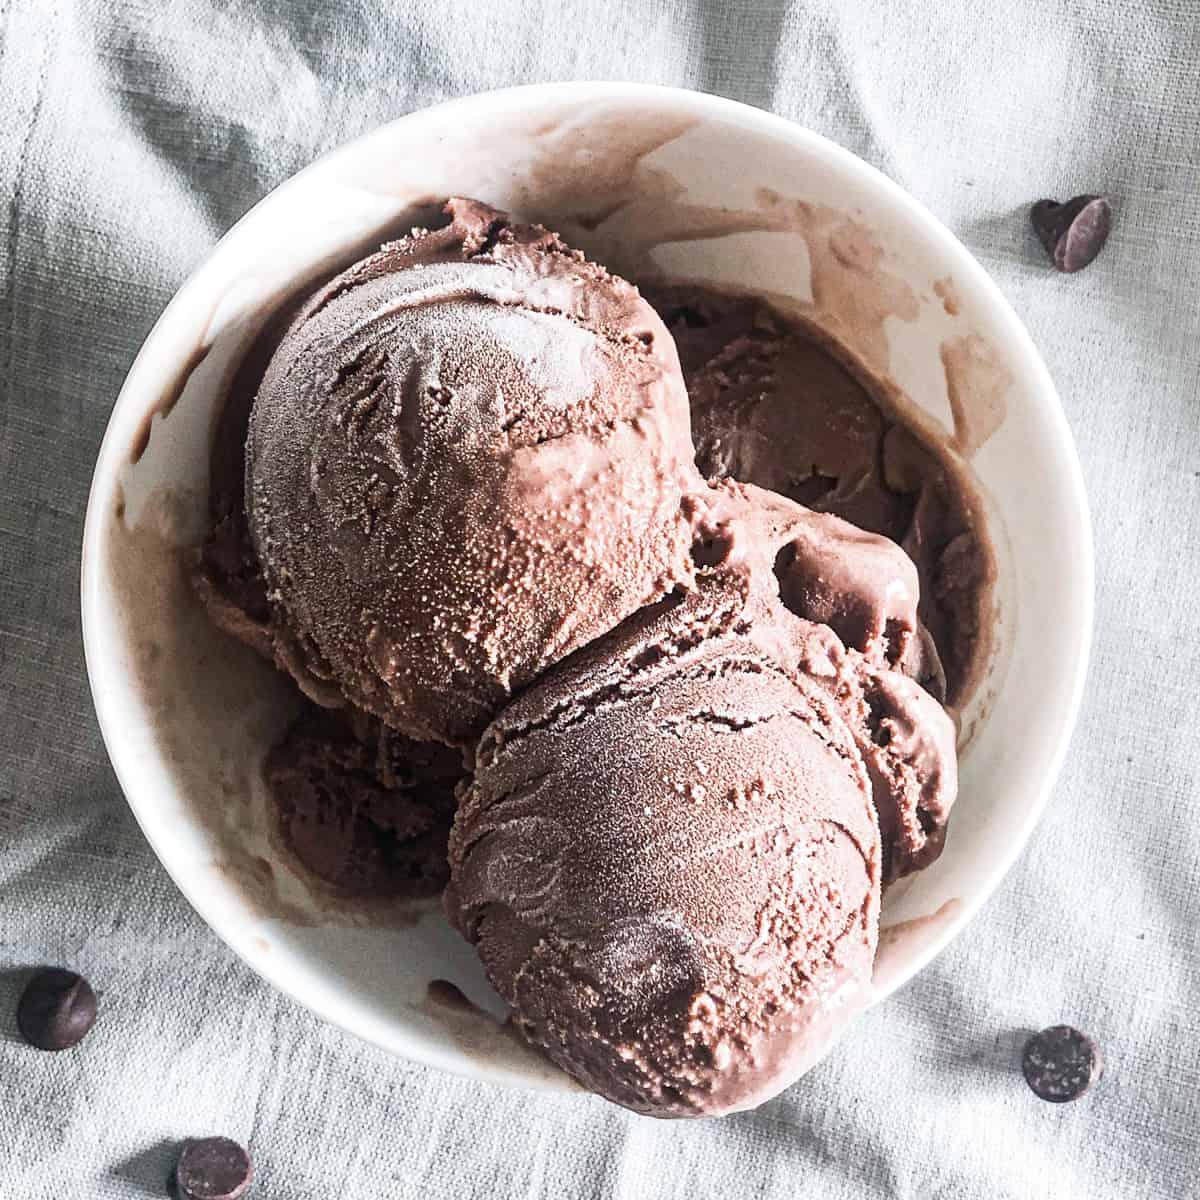 Chocolate ice cream is a great dessert to go with spaghetti.